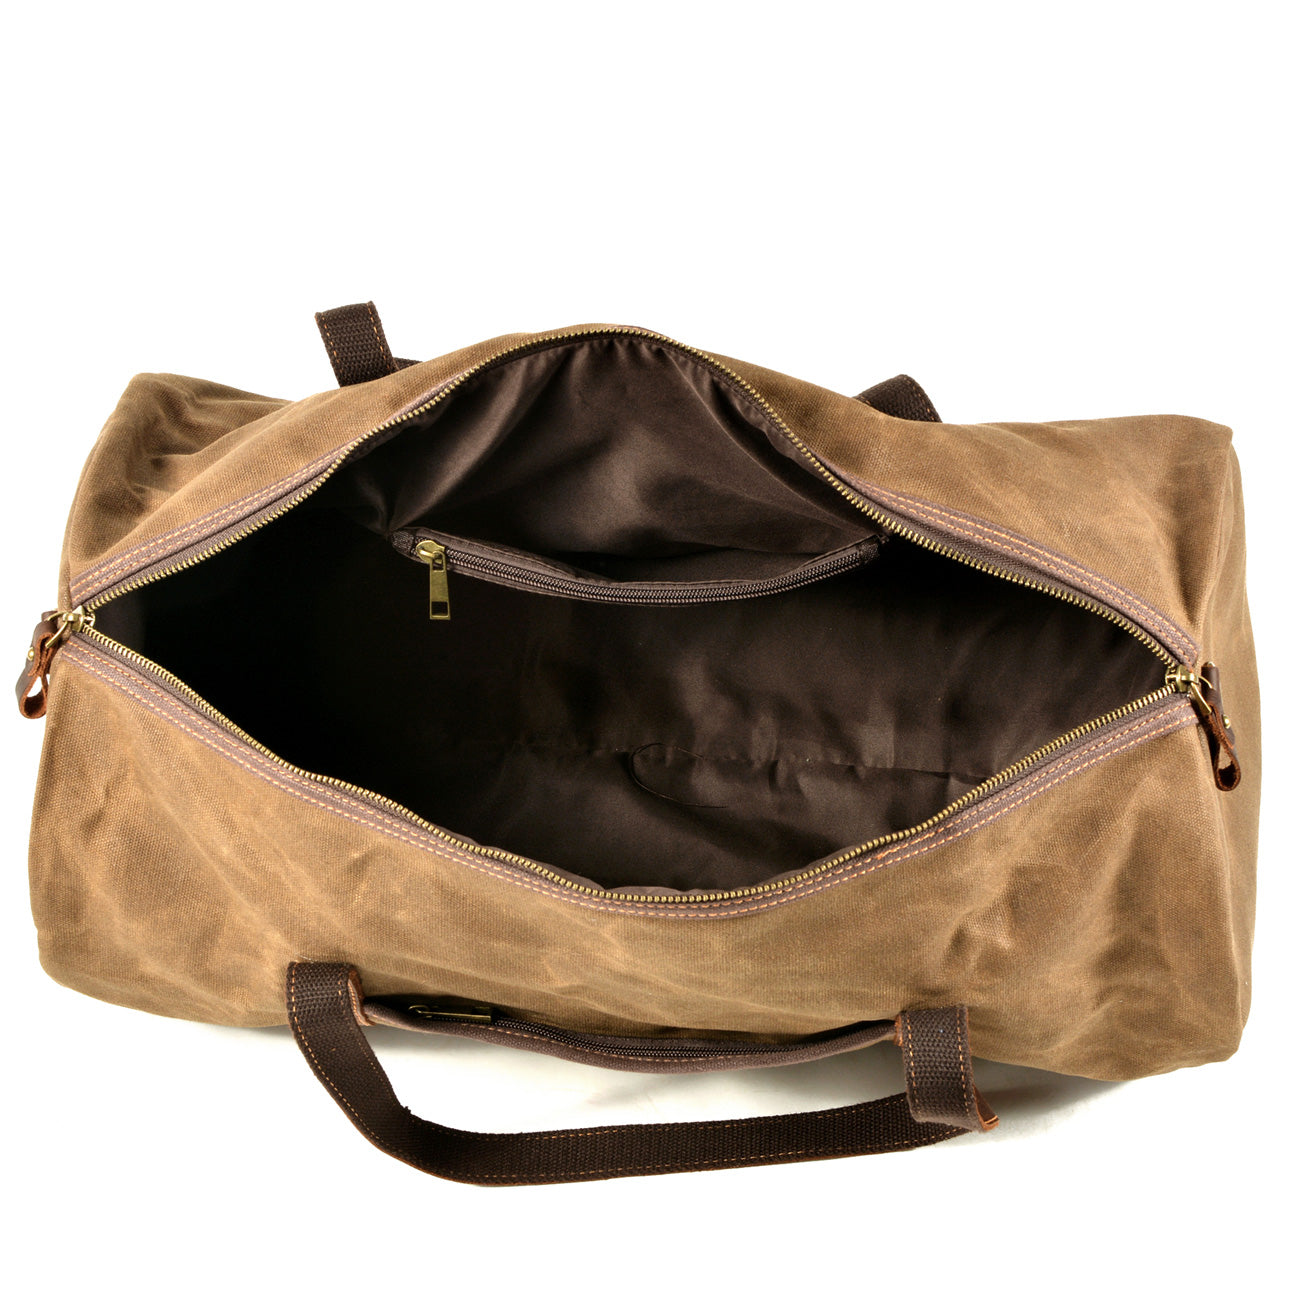 Xiao.p Vintage military Canvas men travel bags Carry on Luggage bags Men Duffel  bags travel